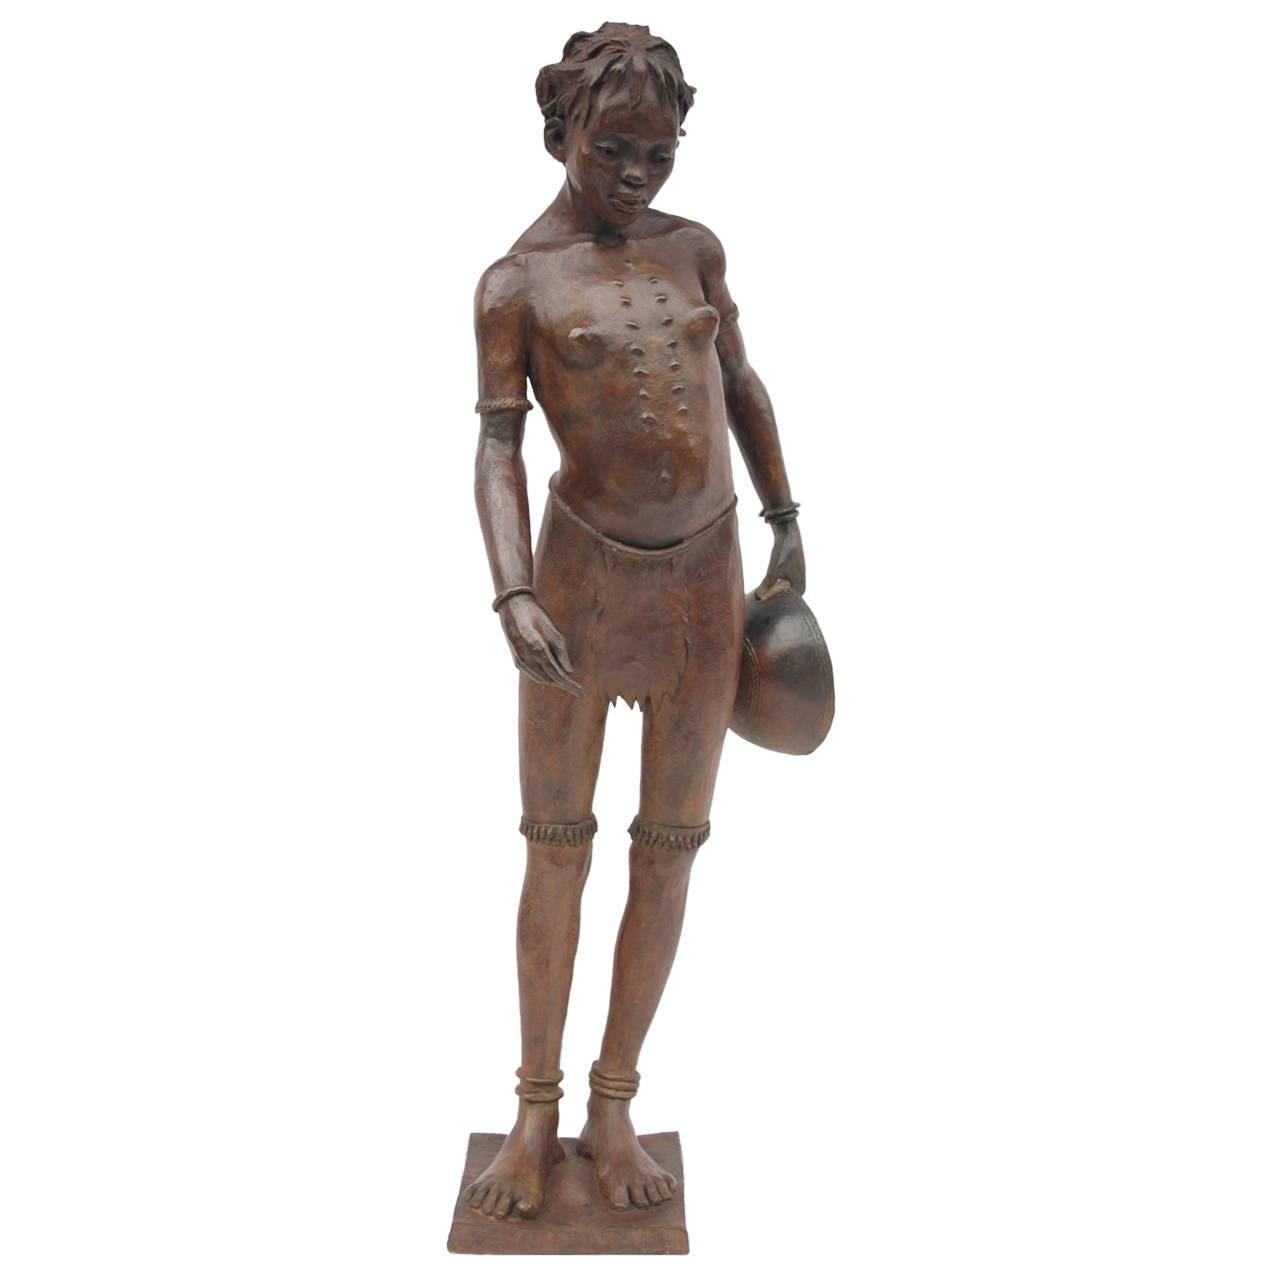 BrJacques Darbaud, “Young lady with a gourd”, bronze sculpture